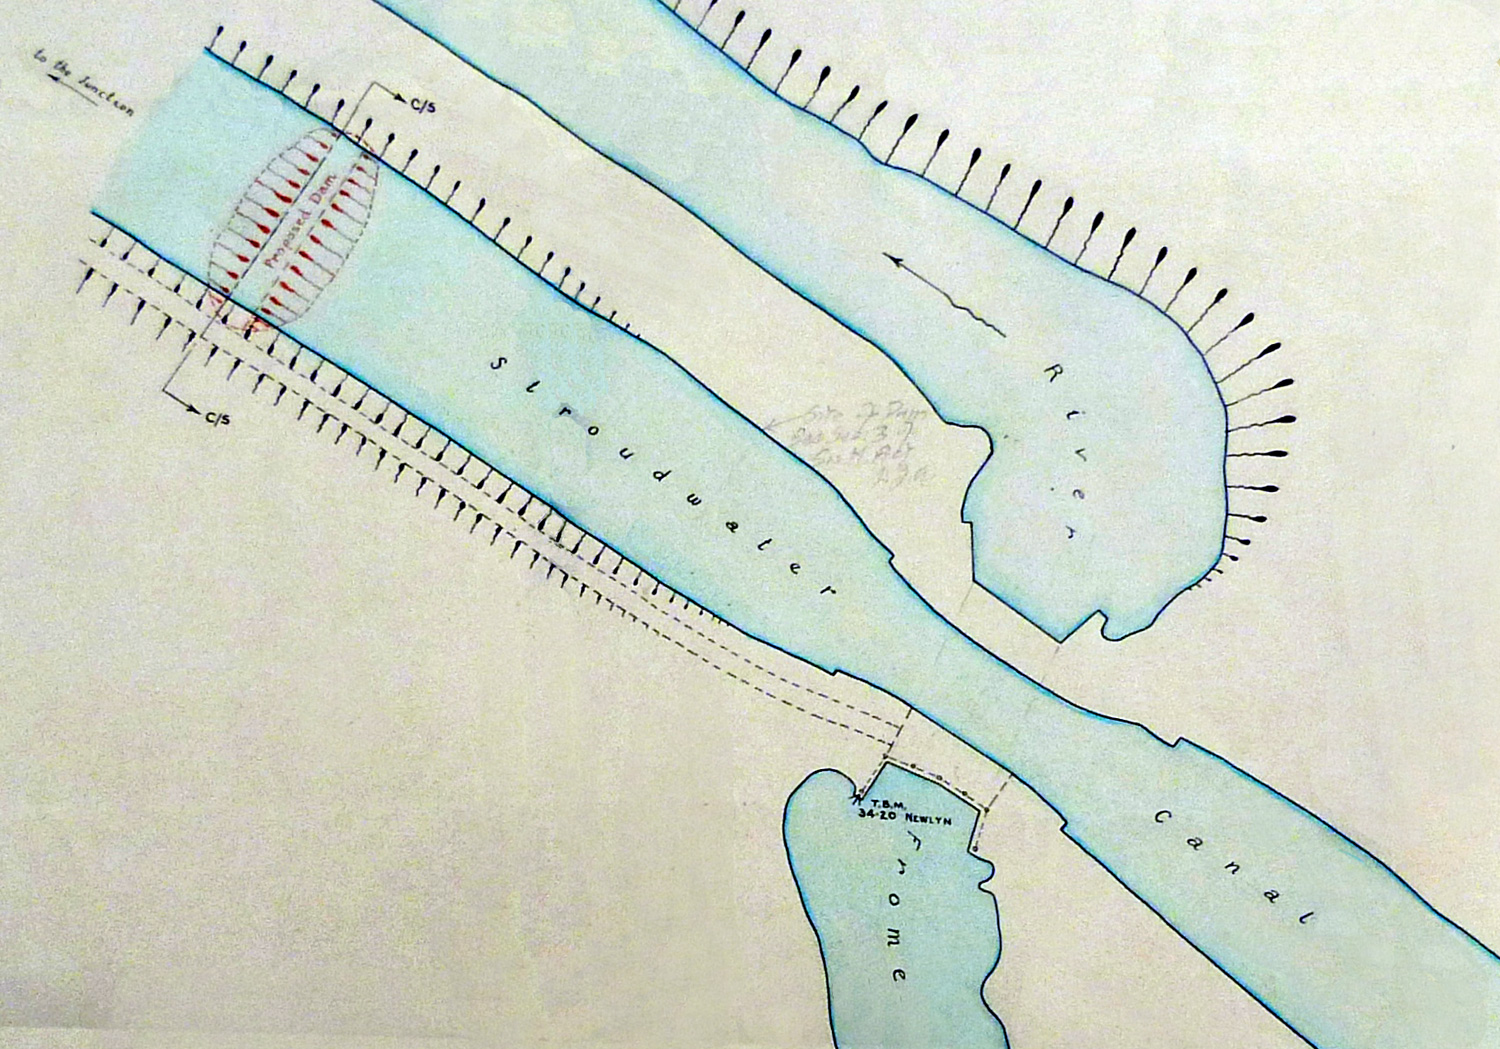 Plan of Whitminster Aqueduct 1955 (Glos Arch D1180/10/47)